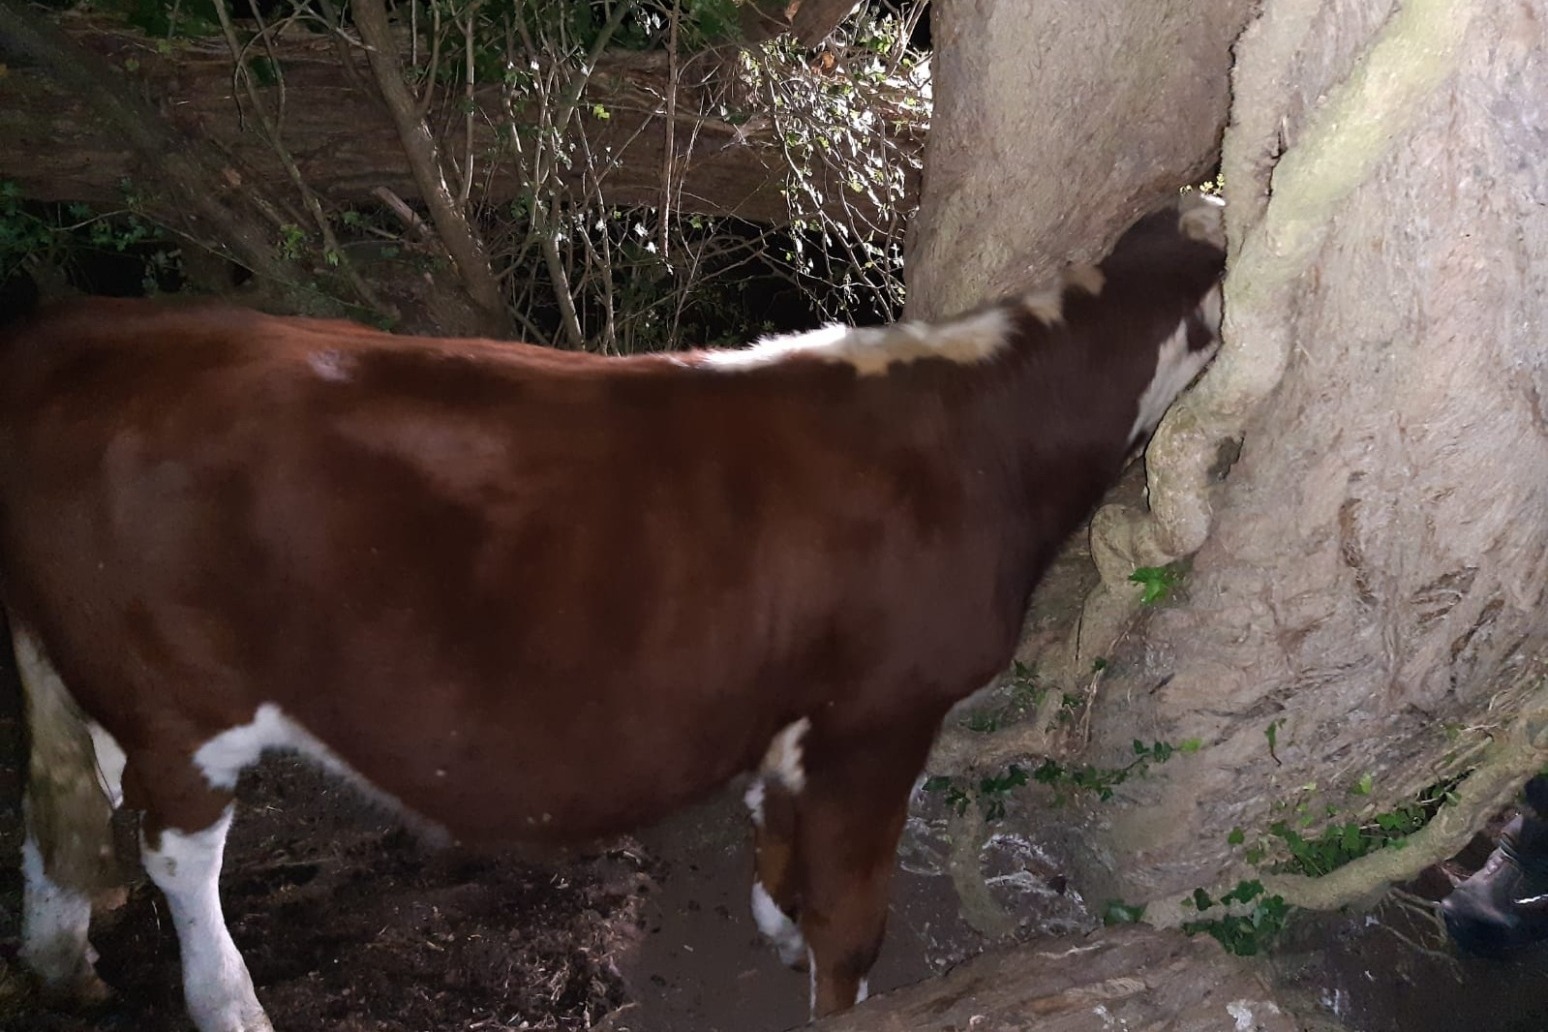 Firefighters free cow’s head from tree after ‘udderly ridiculous’ incident 